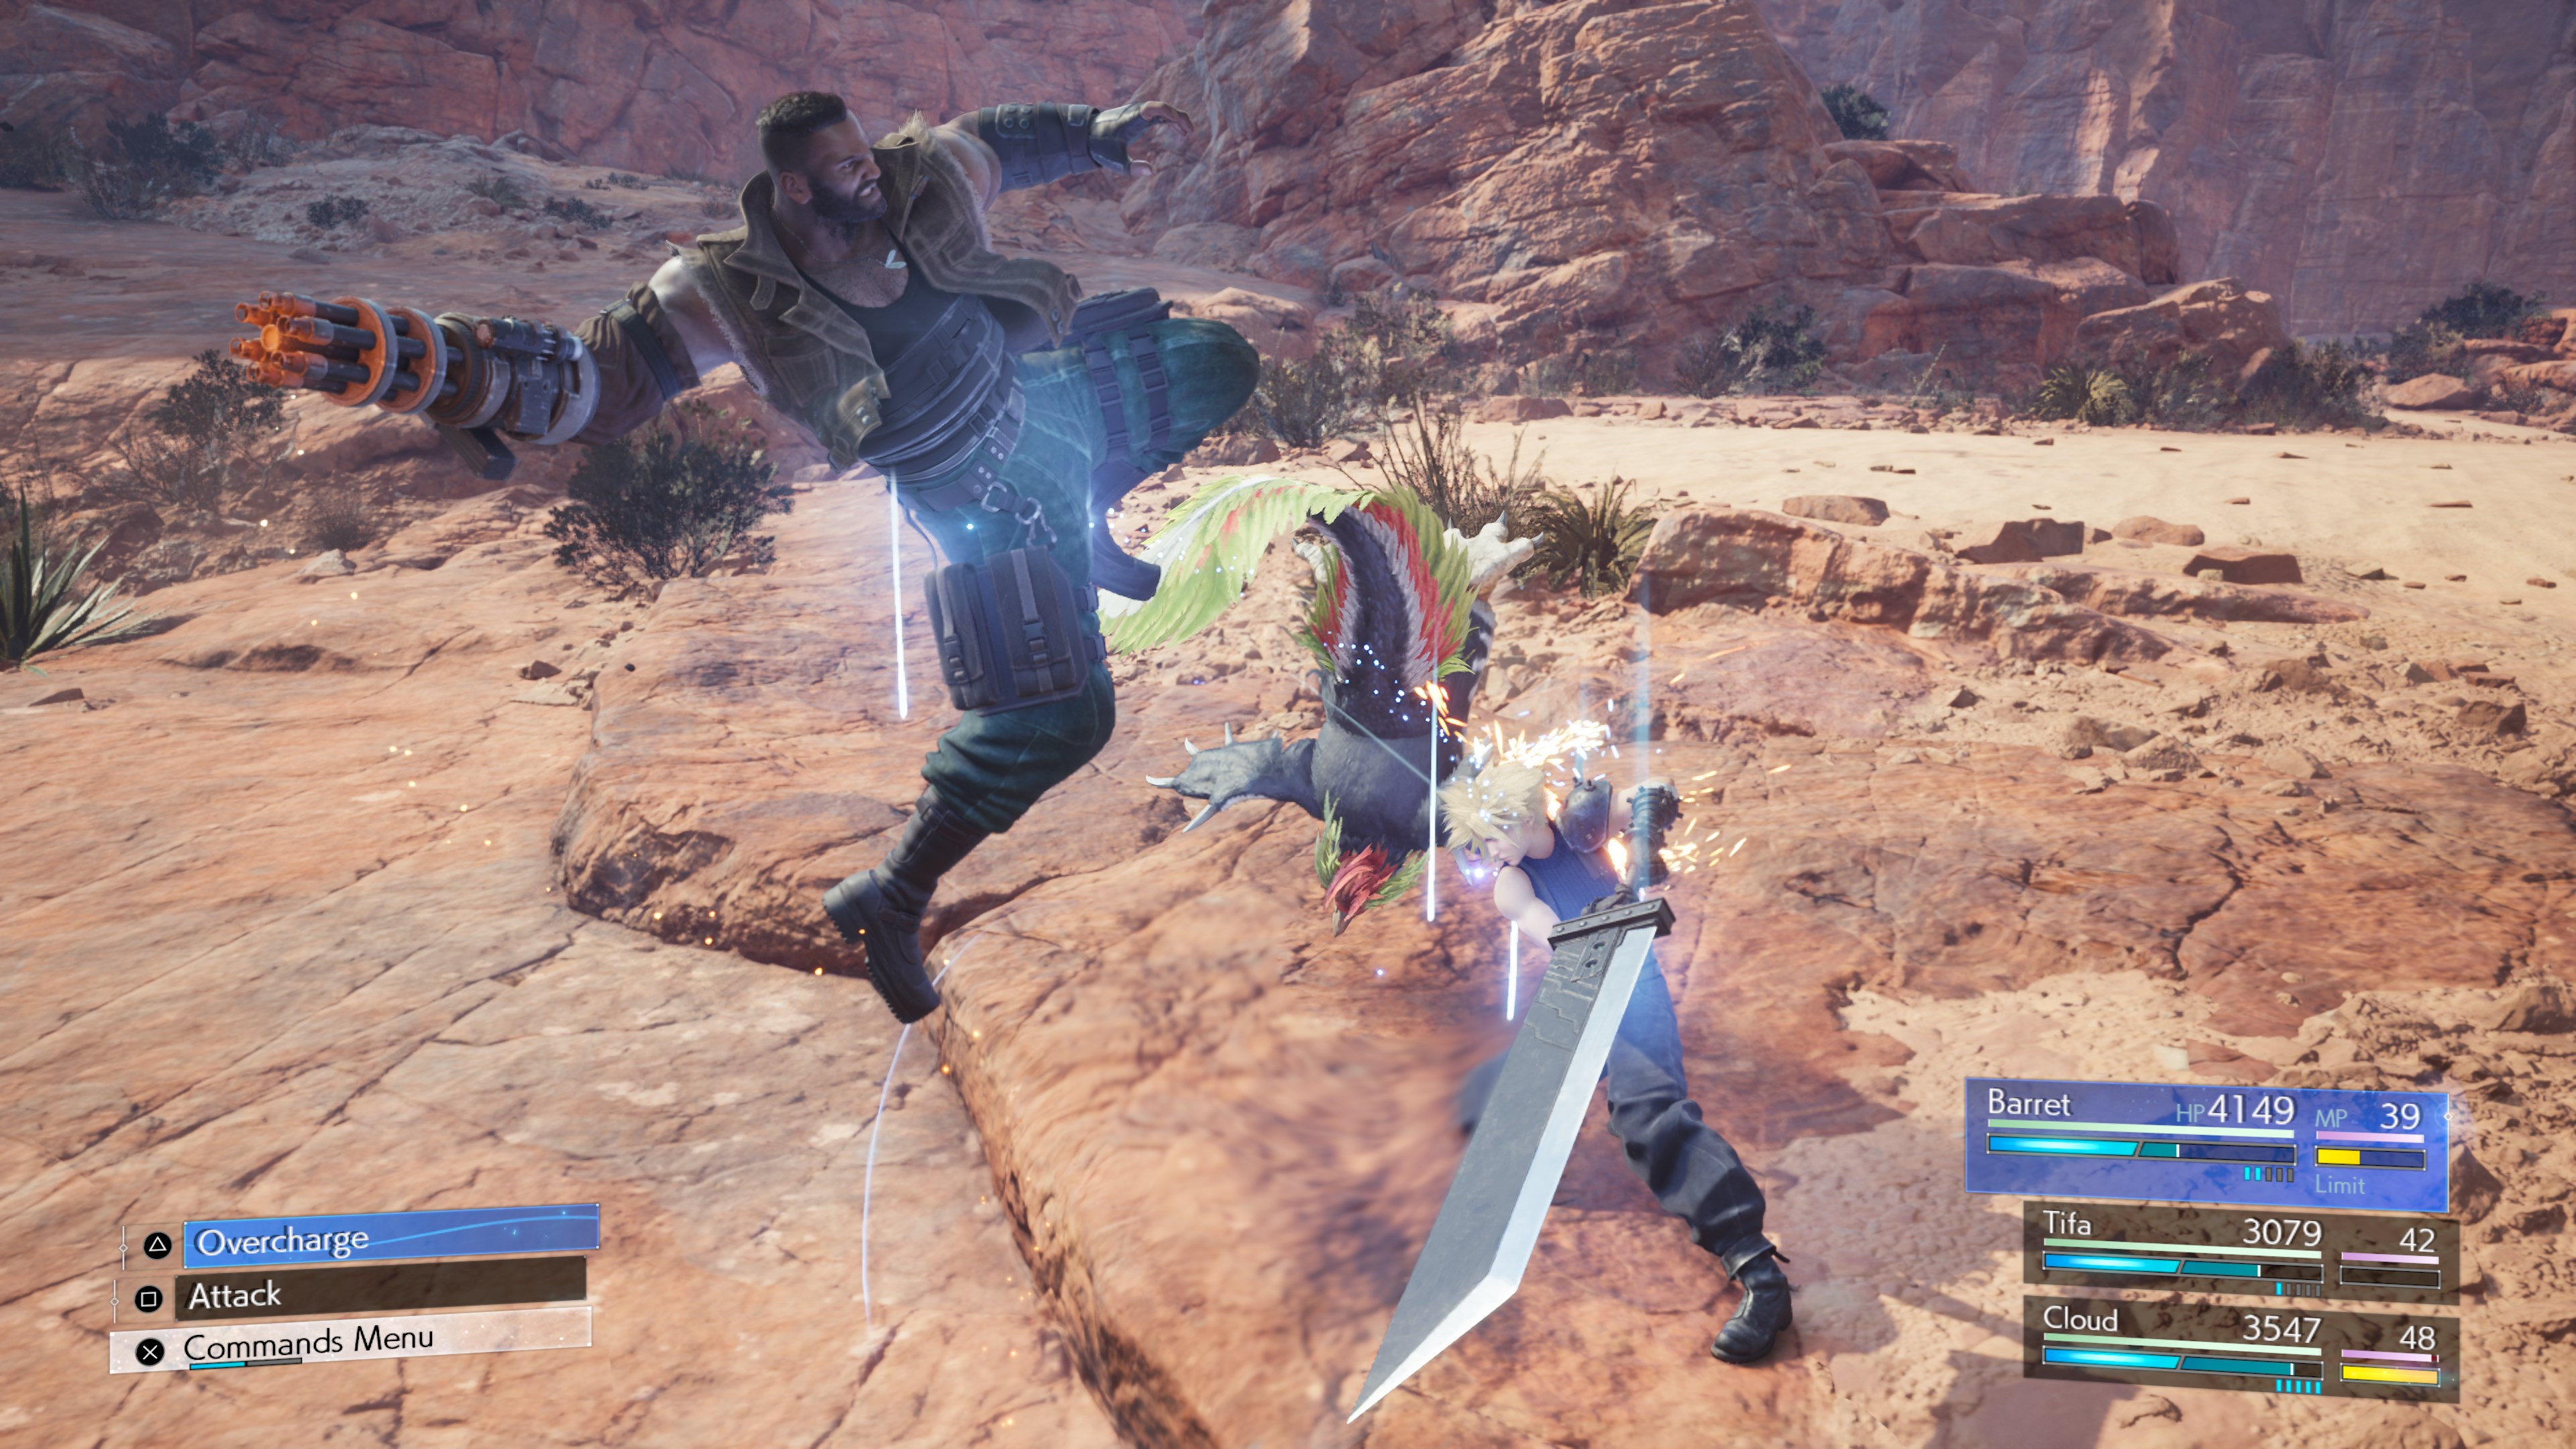 Barret and Cloud battle a Skeeskee in a desert area in a gameplay screenshot from Final Fantasy 7 Rebirth